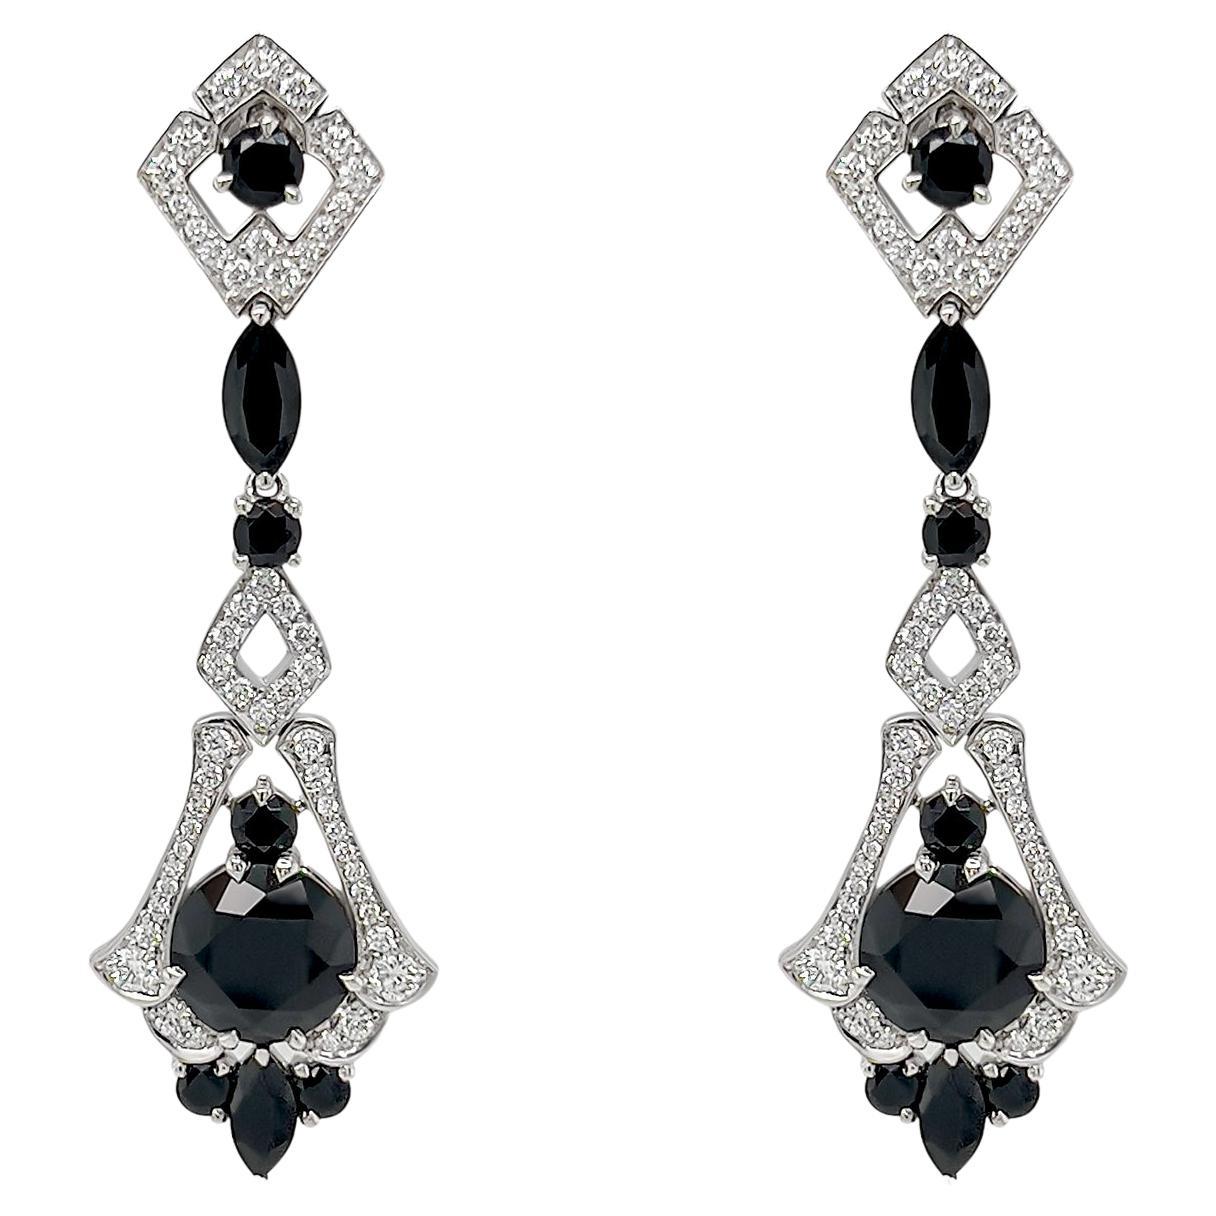 4.70 Carats Black Spinel and Diamond Earrings in 18k White Gold 